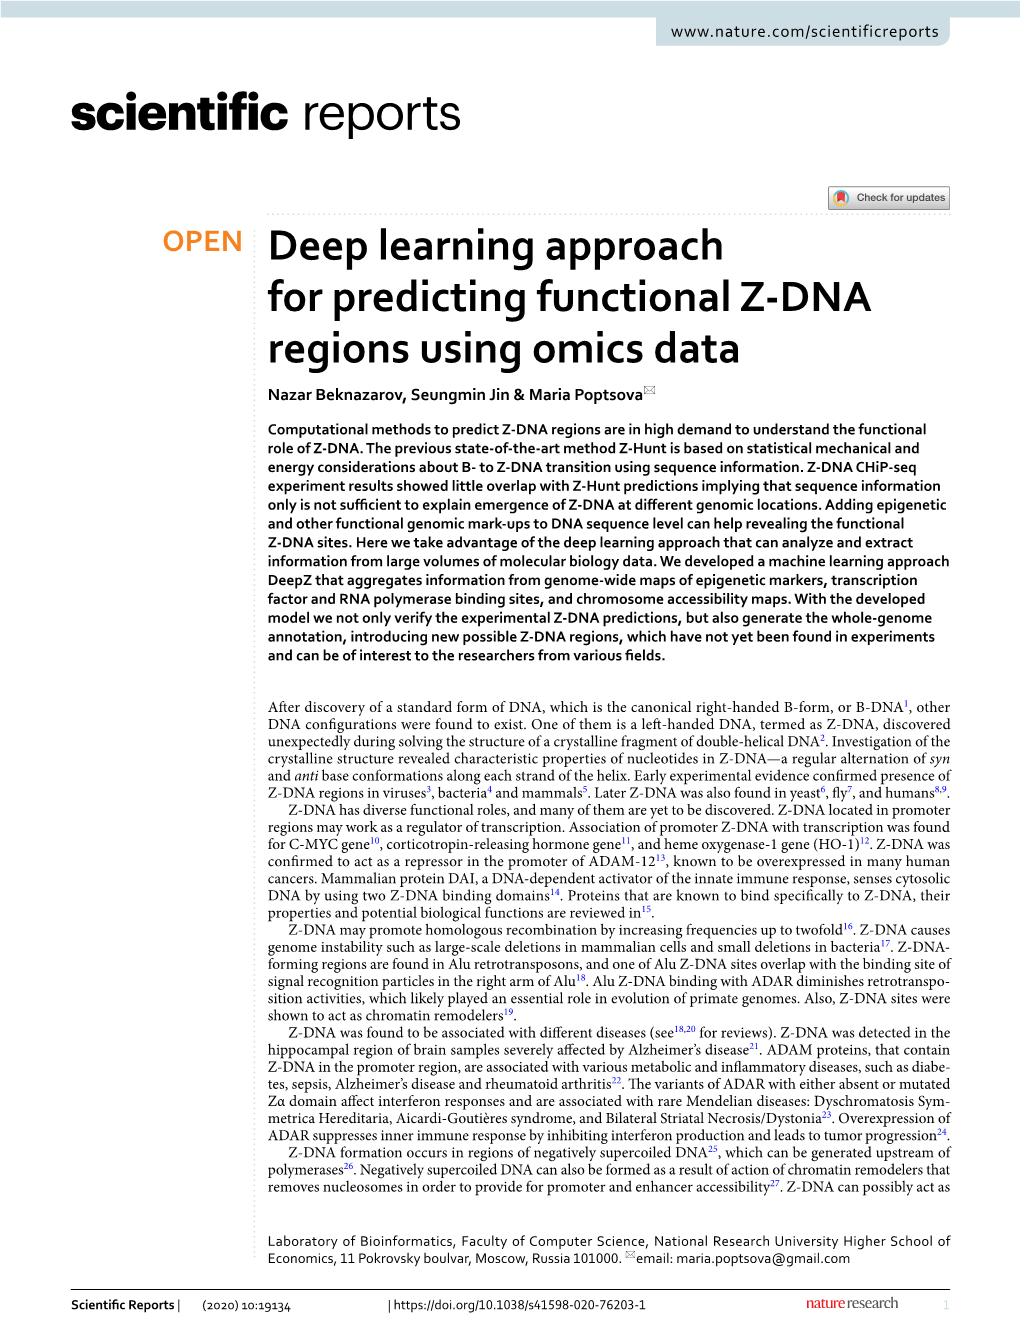 Deep Learning Approach for Predicting Functional Z-DNA Regions